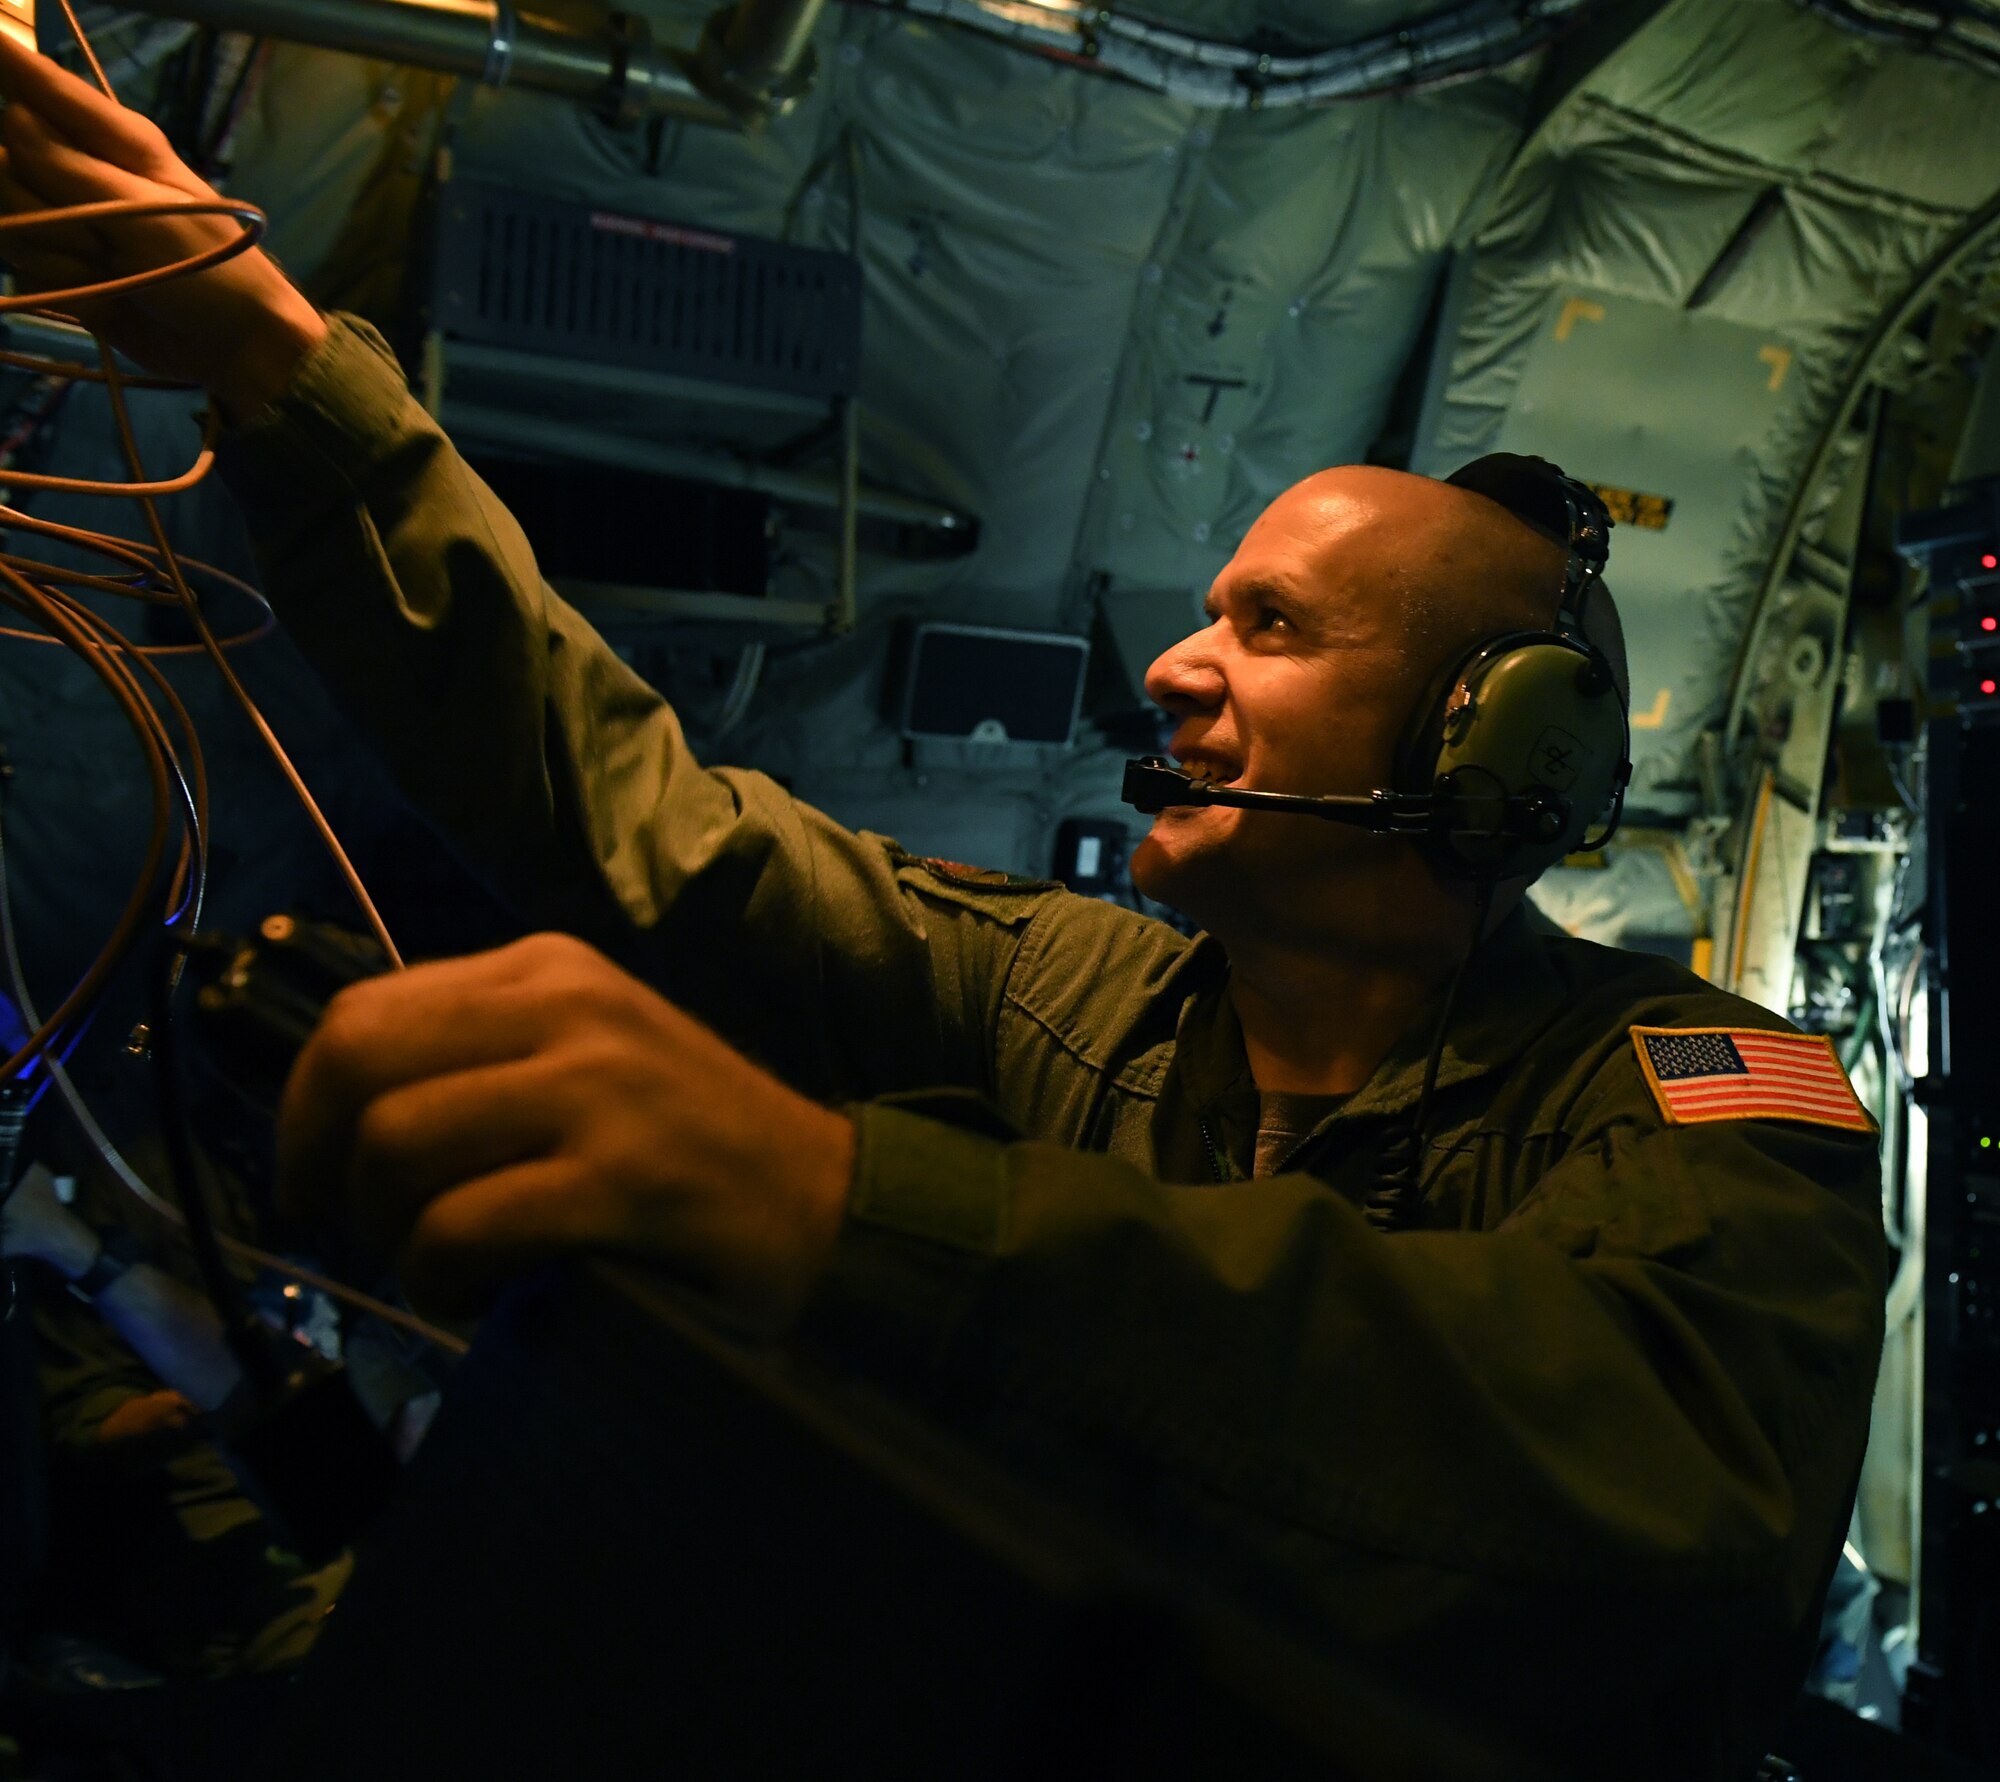 U.S. Air Force Master Sgt. Aaron Harman, an Electronic Communication Systems operator with the 193rd Special Operations Group, pulls patch cables during the EC-130J Commando Solo aircraft final training flight in Middletown, Pennsylvania, Sept. 17, 2022.